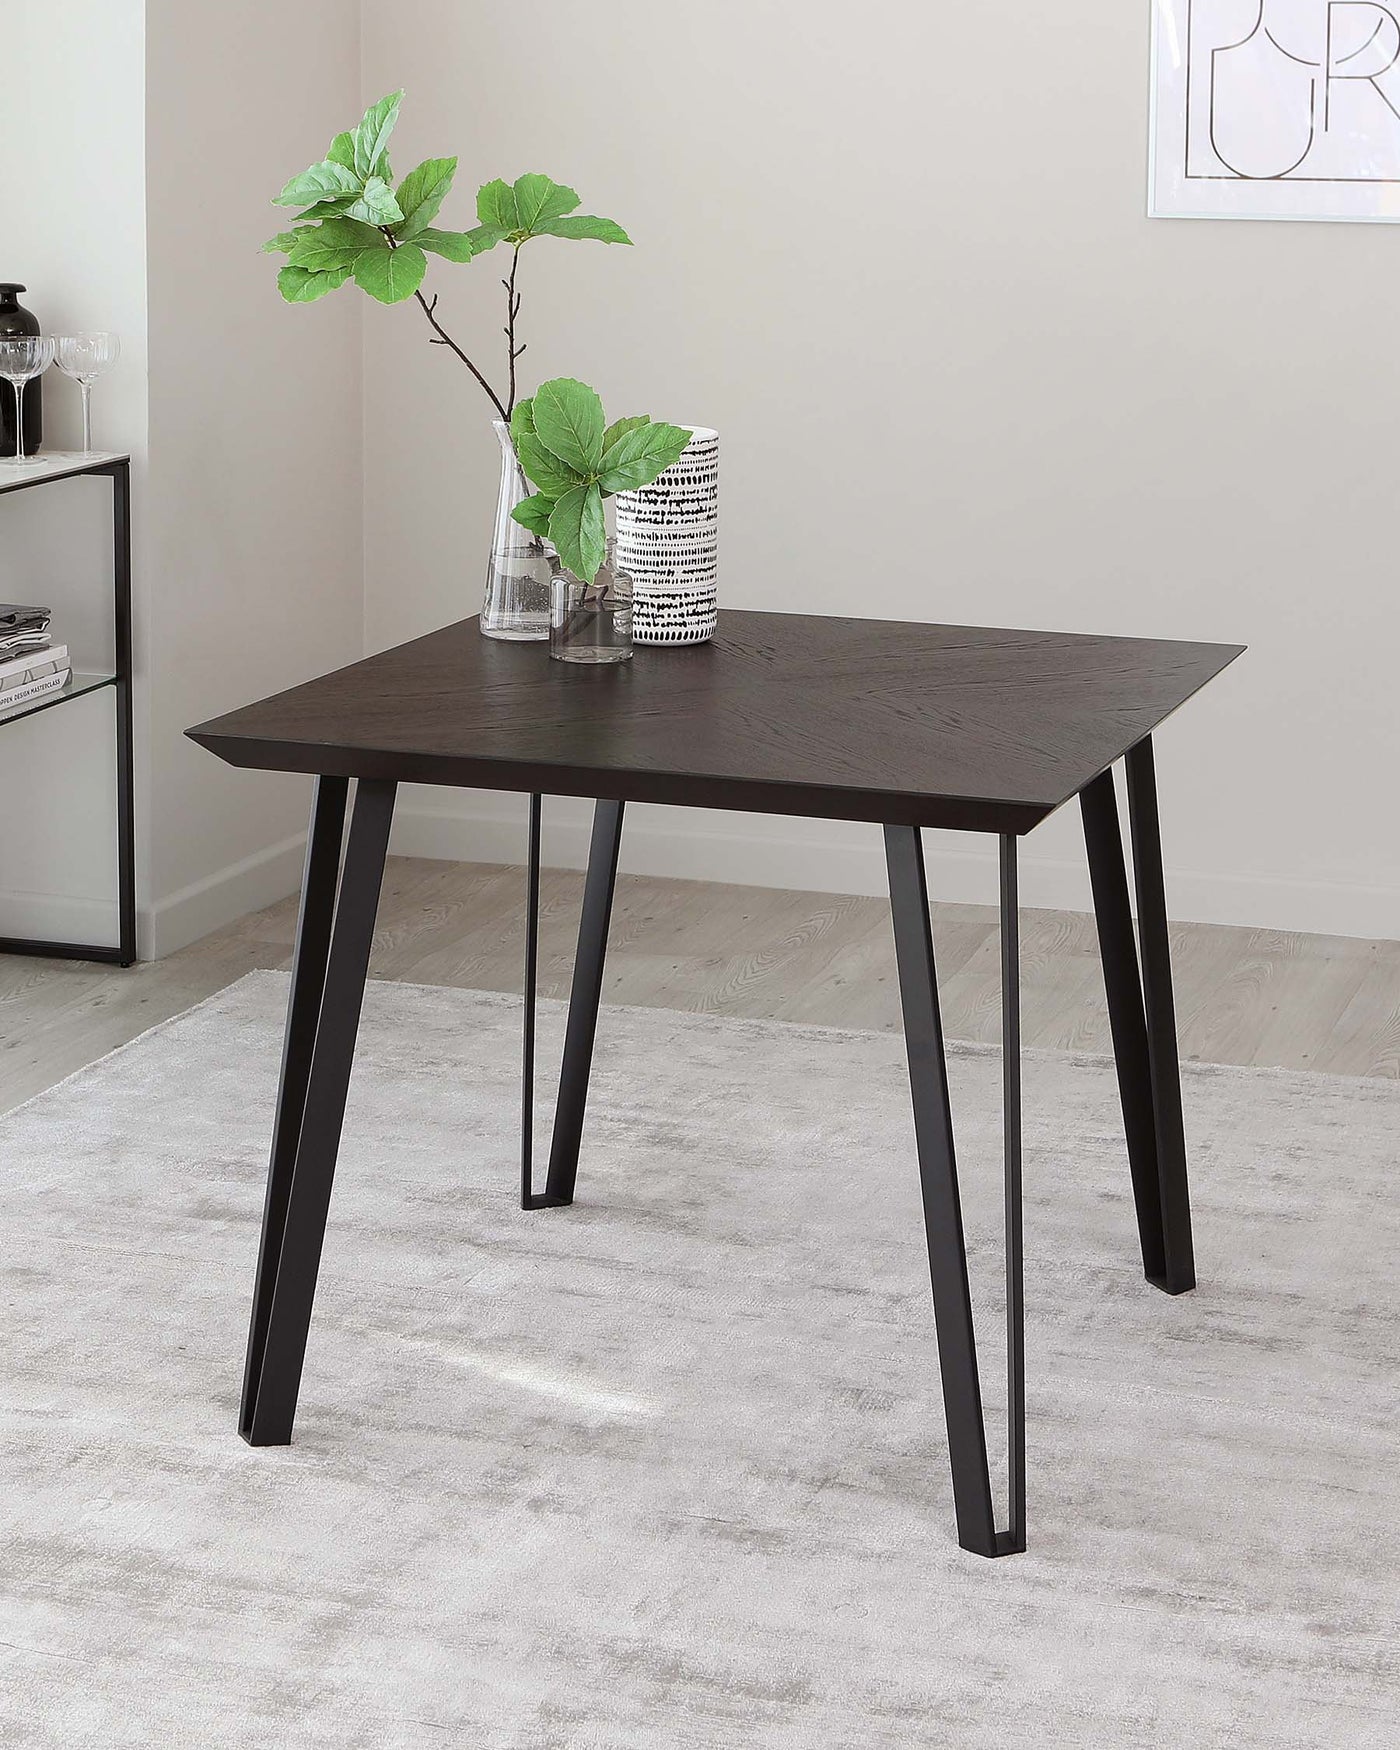 Modern minimalist dark wood dining table with angled black metal legs, displayed in a contemporary room with a light grey rug, accompanied by a clear glass vase with greenery and a decorative black and white patterned vase.